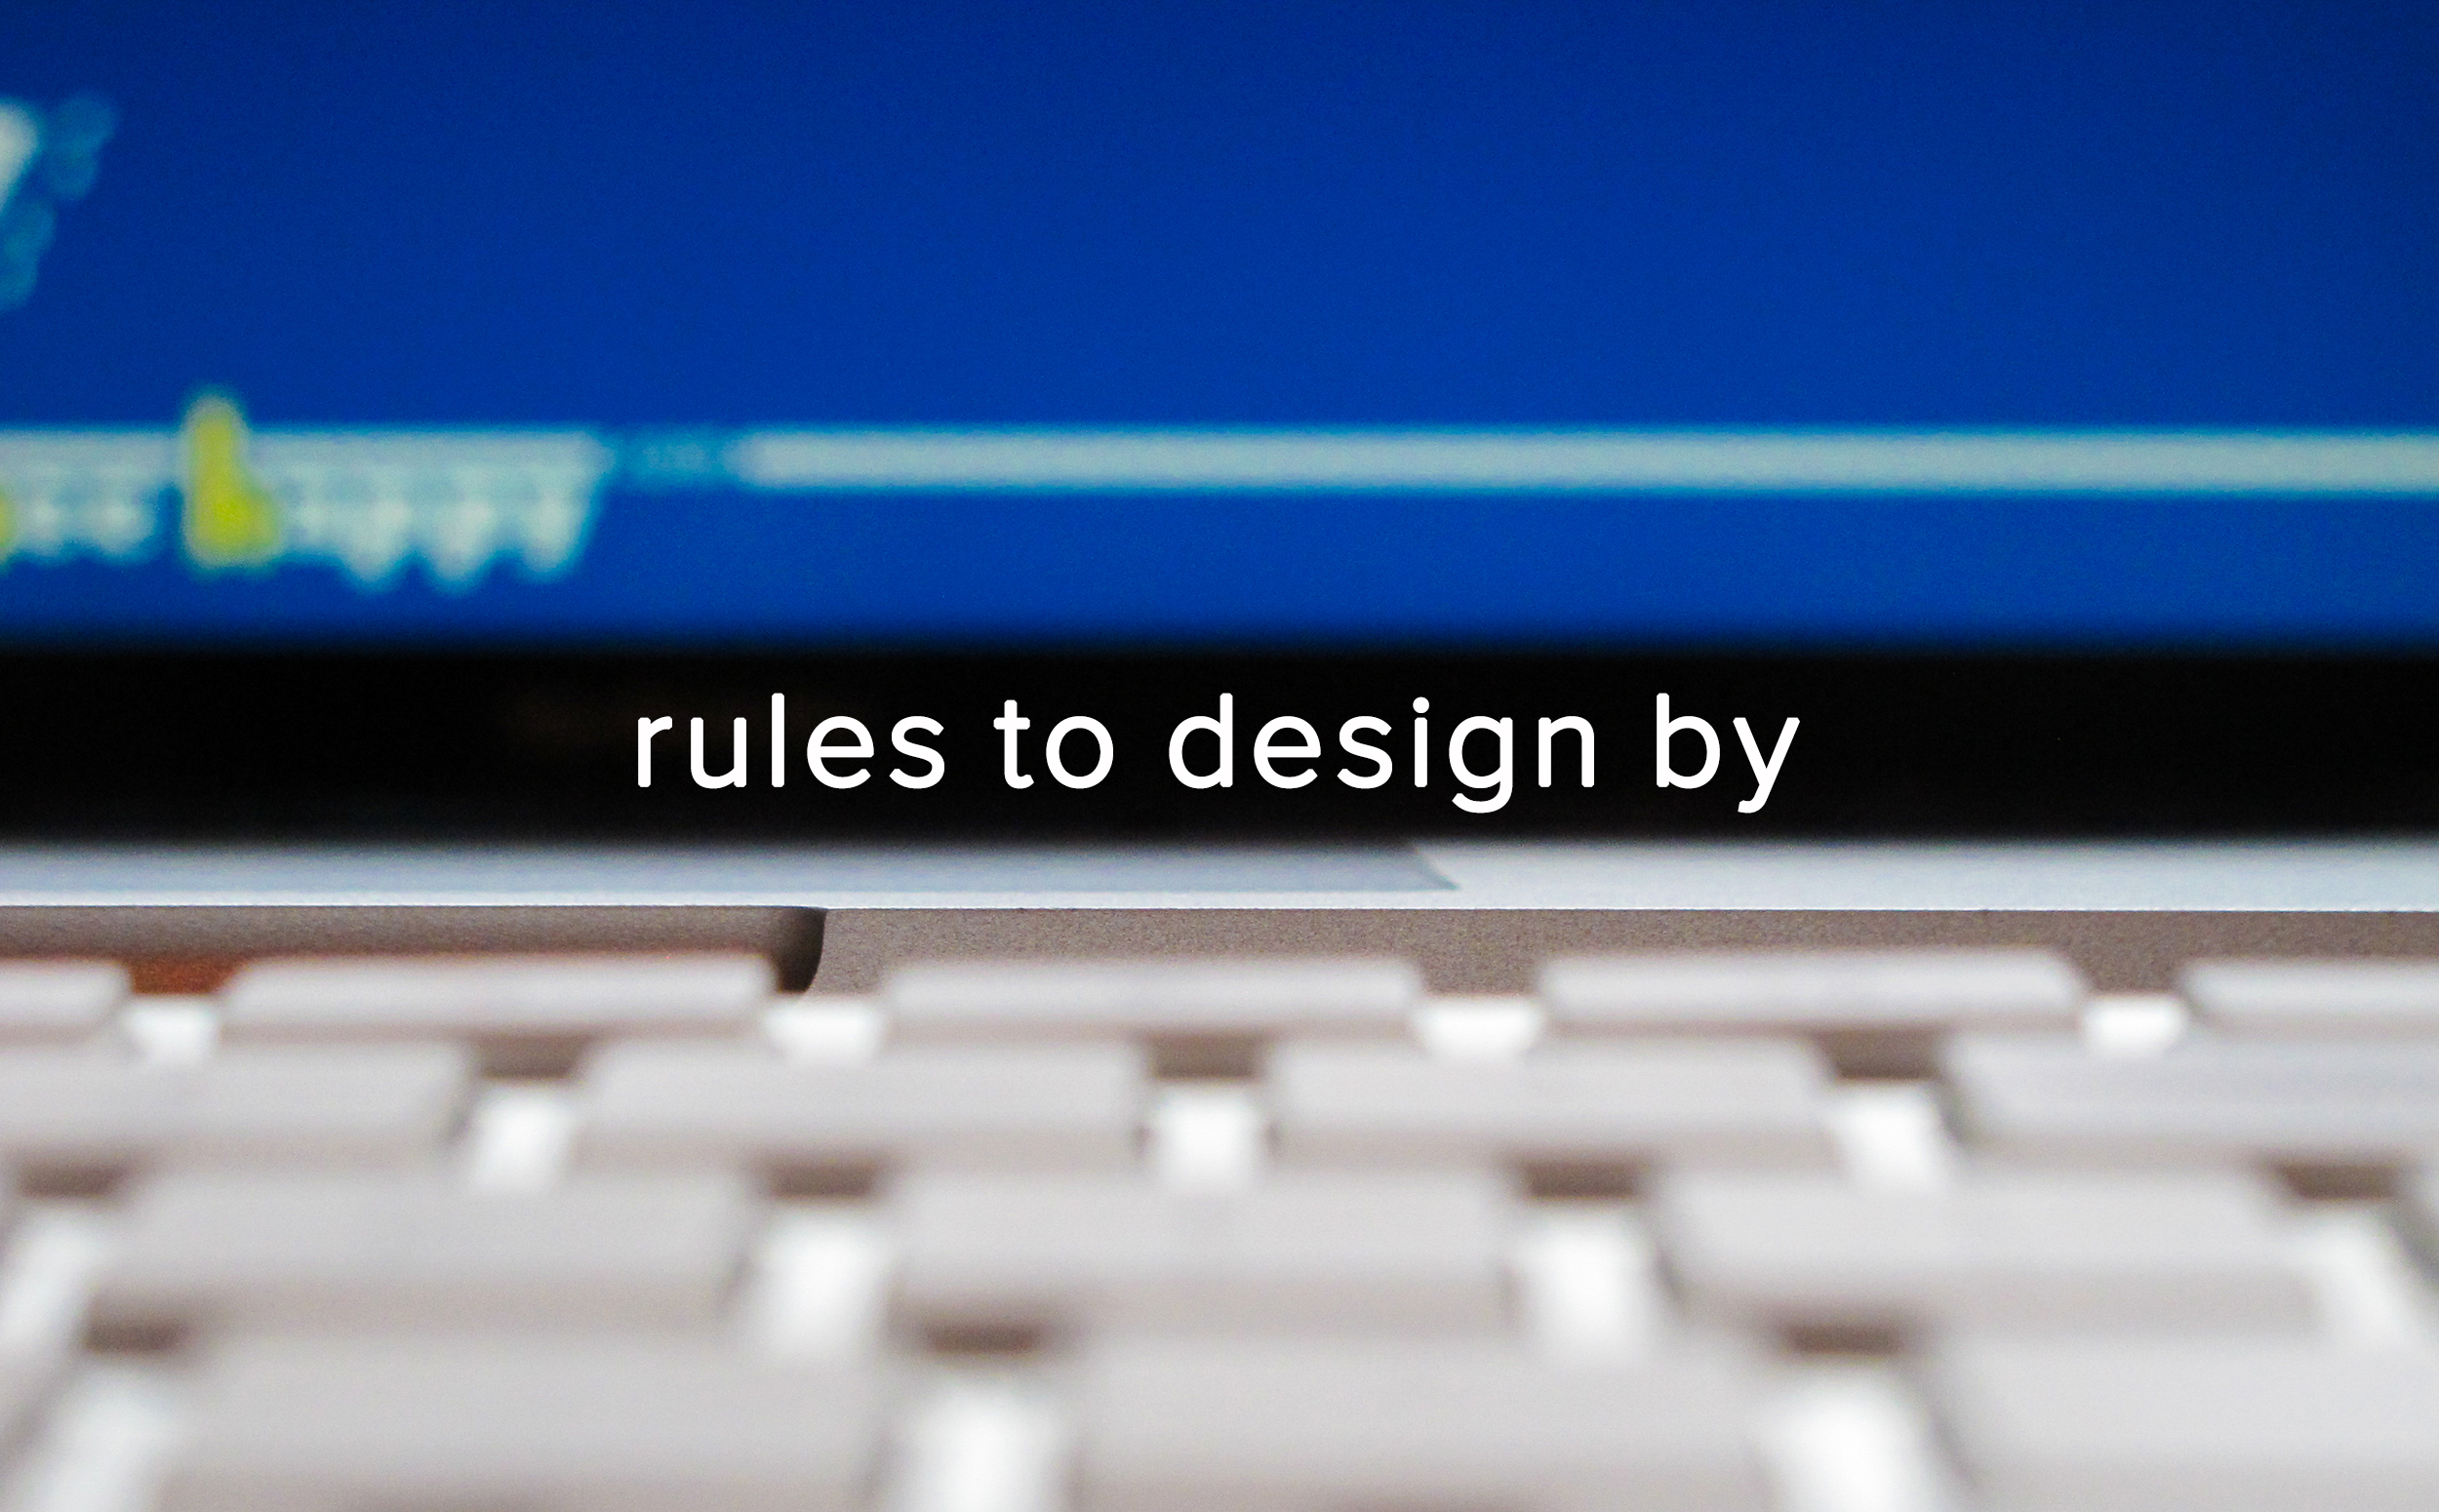 Rules to Design By from Smart Hive